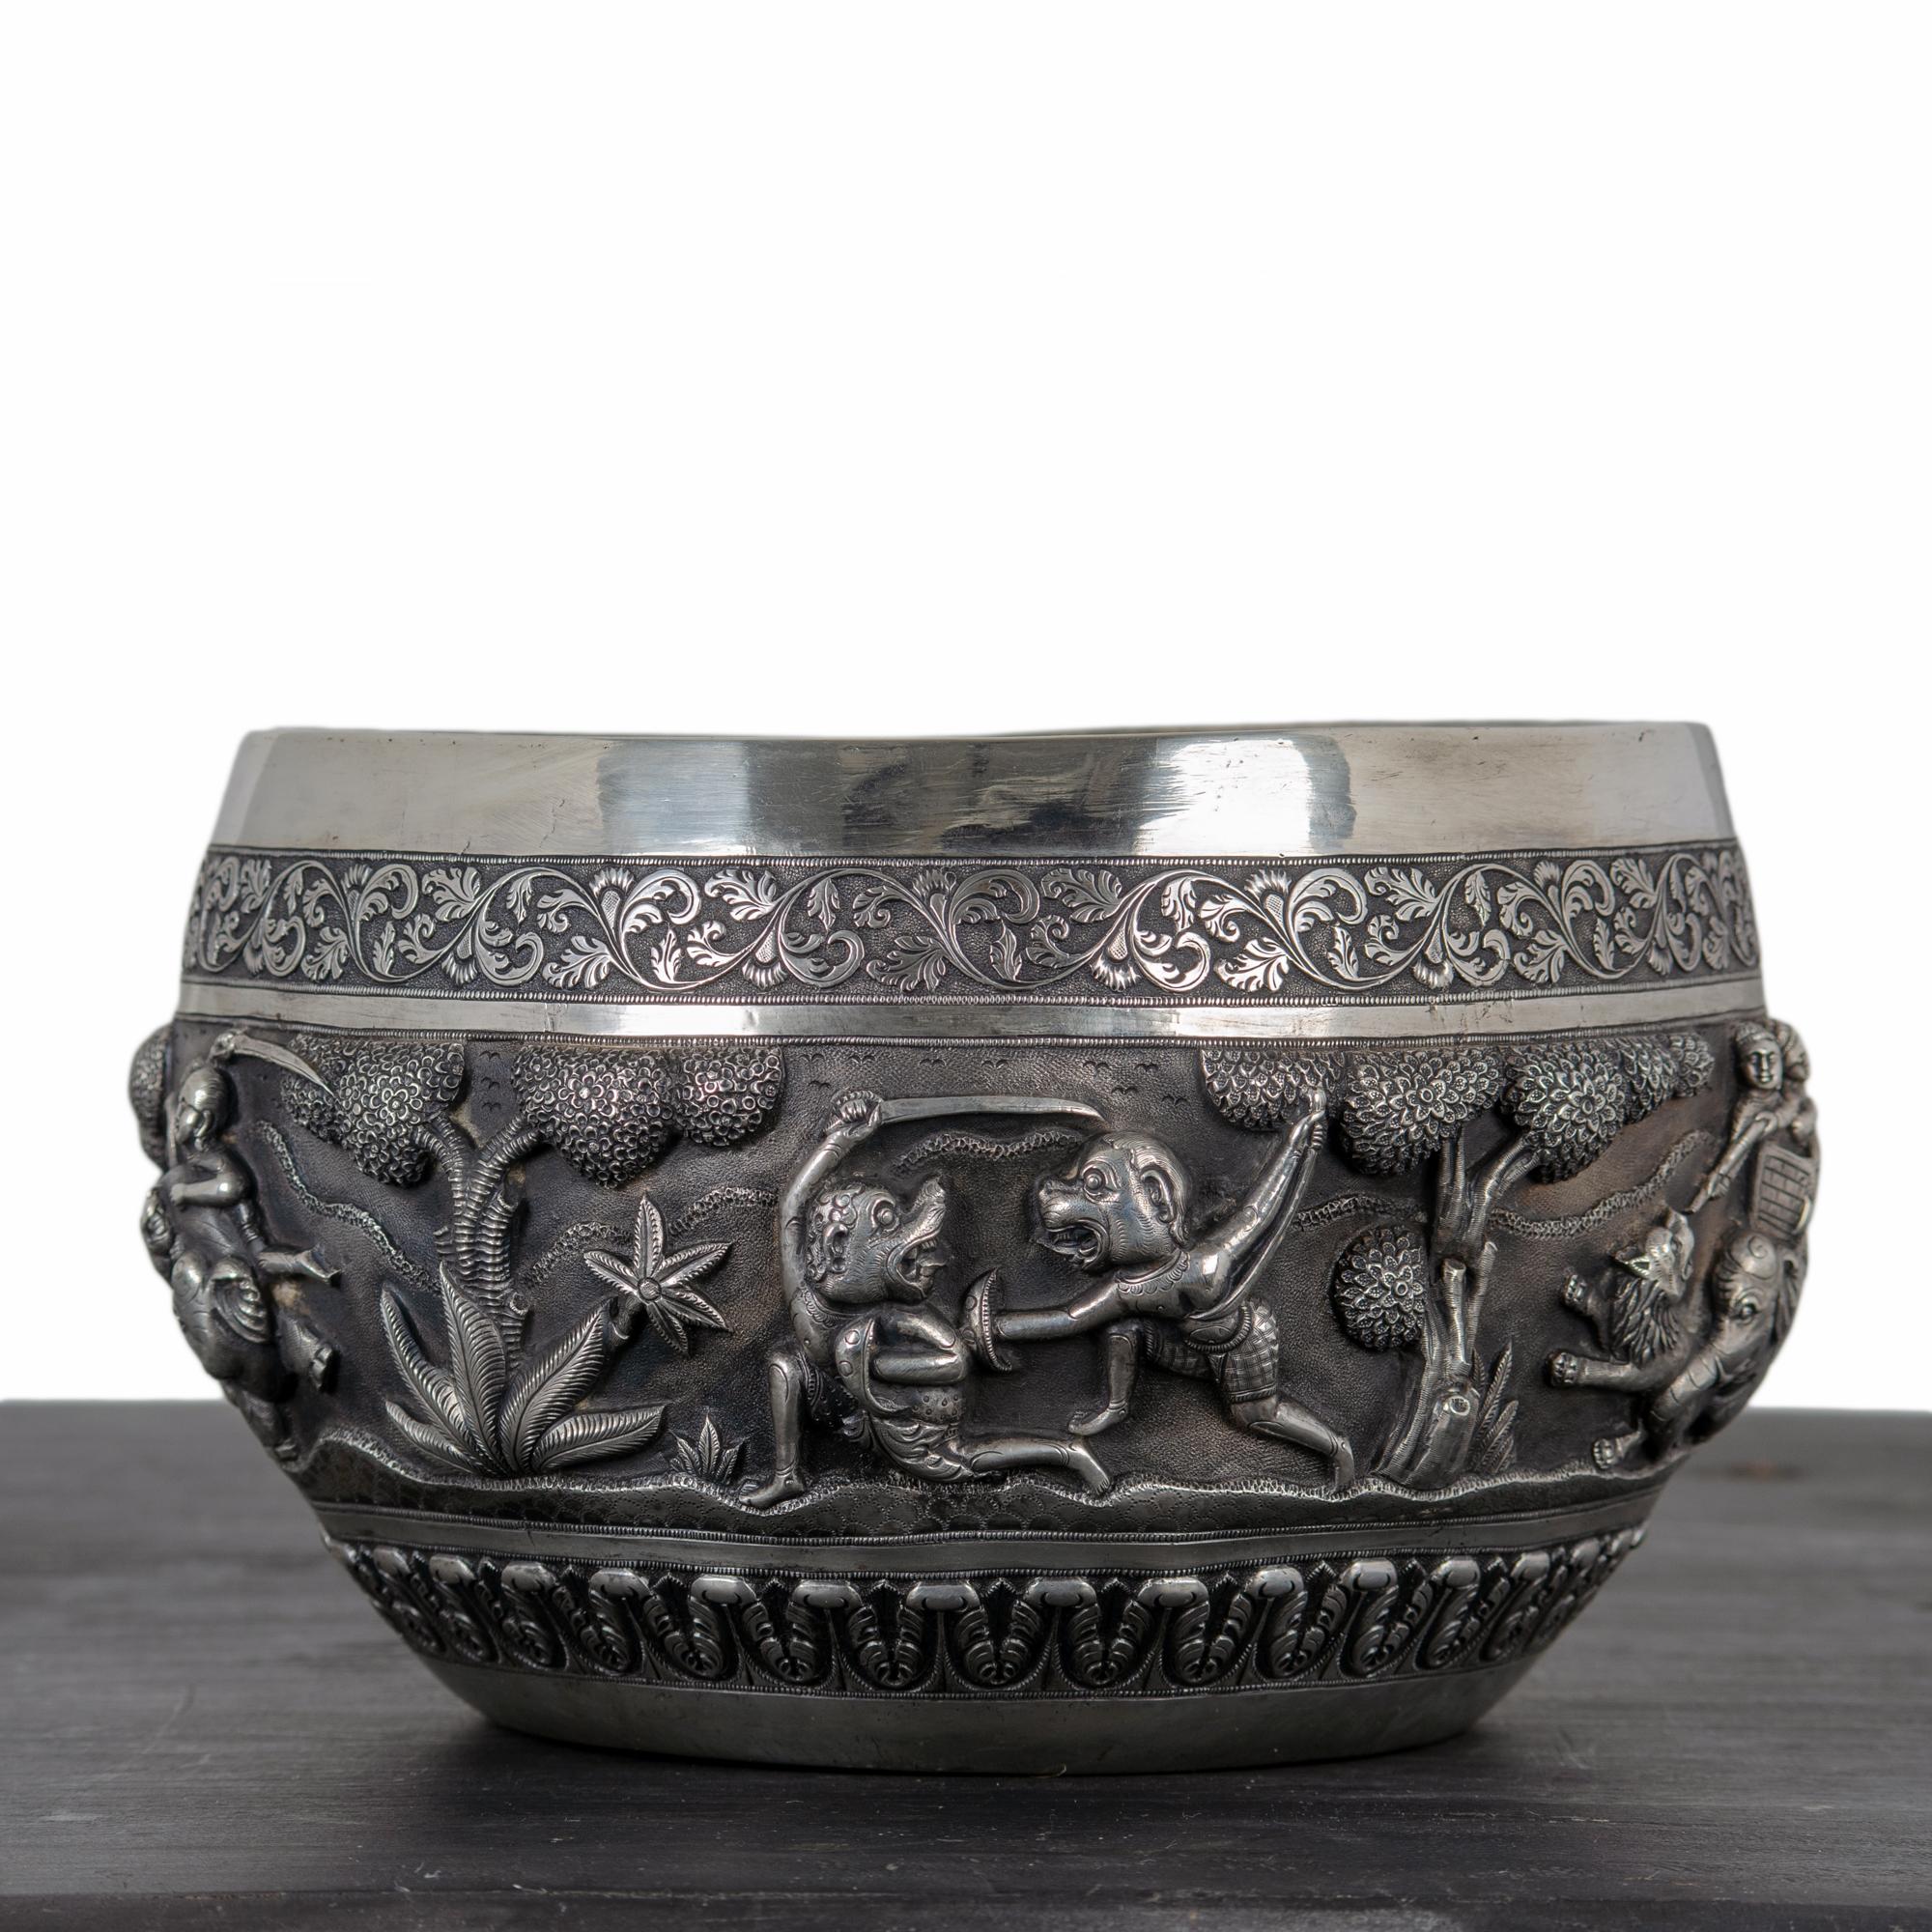 A large repoussé silver ceremonial hunting bowl, Lucknow, North India, Raj Period, late 19th century. 

Five scenes depicting mythological creatures, lion and boar hunt scenes with foliate ornamentation.  Elephant and tree mark on underside; see